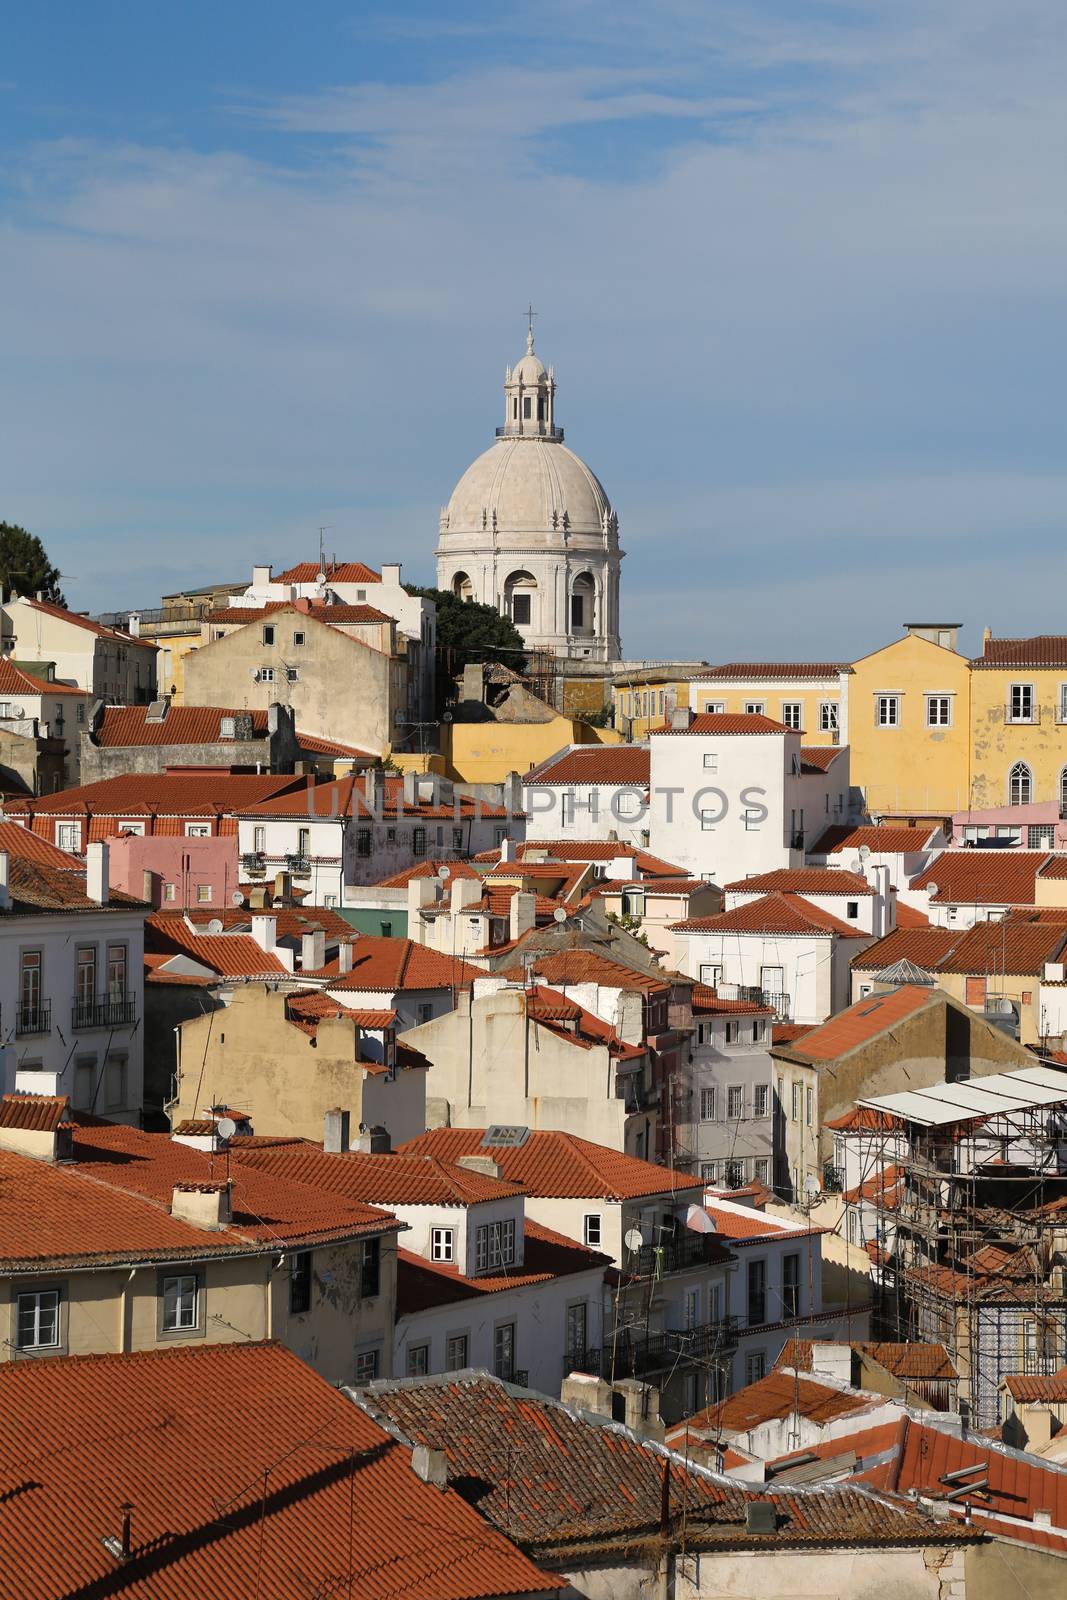 A view on the city of Lisbon - pantheon